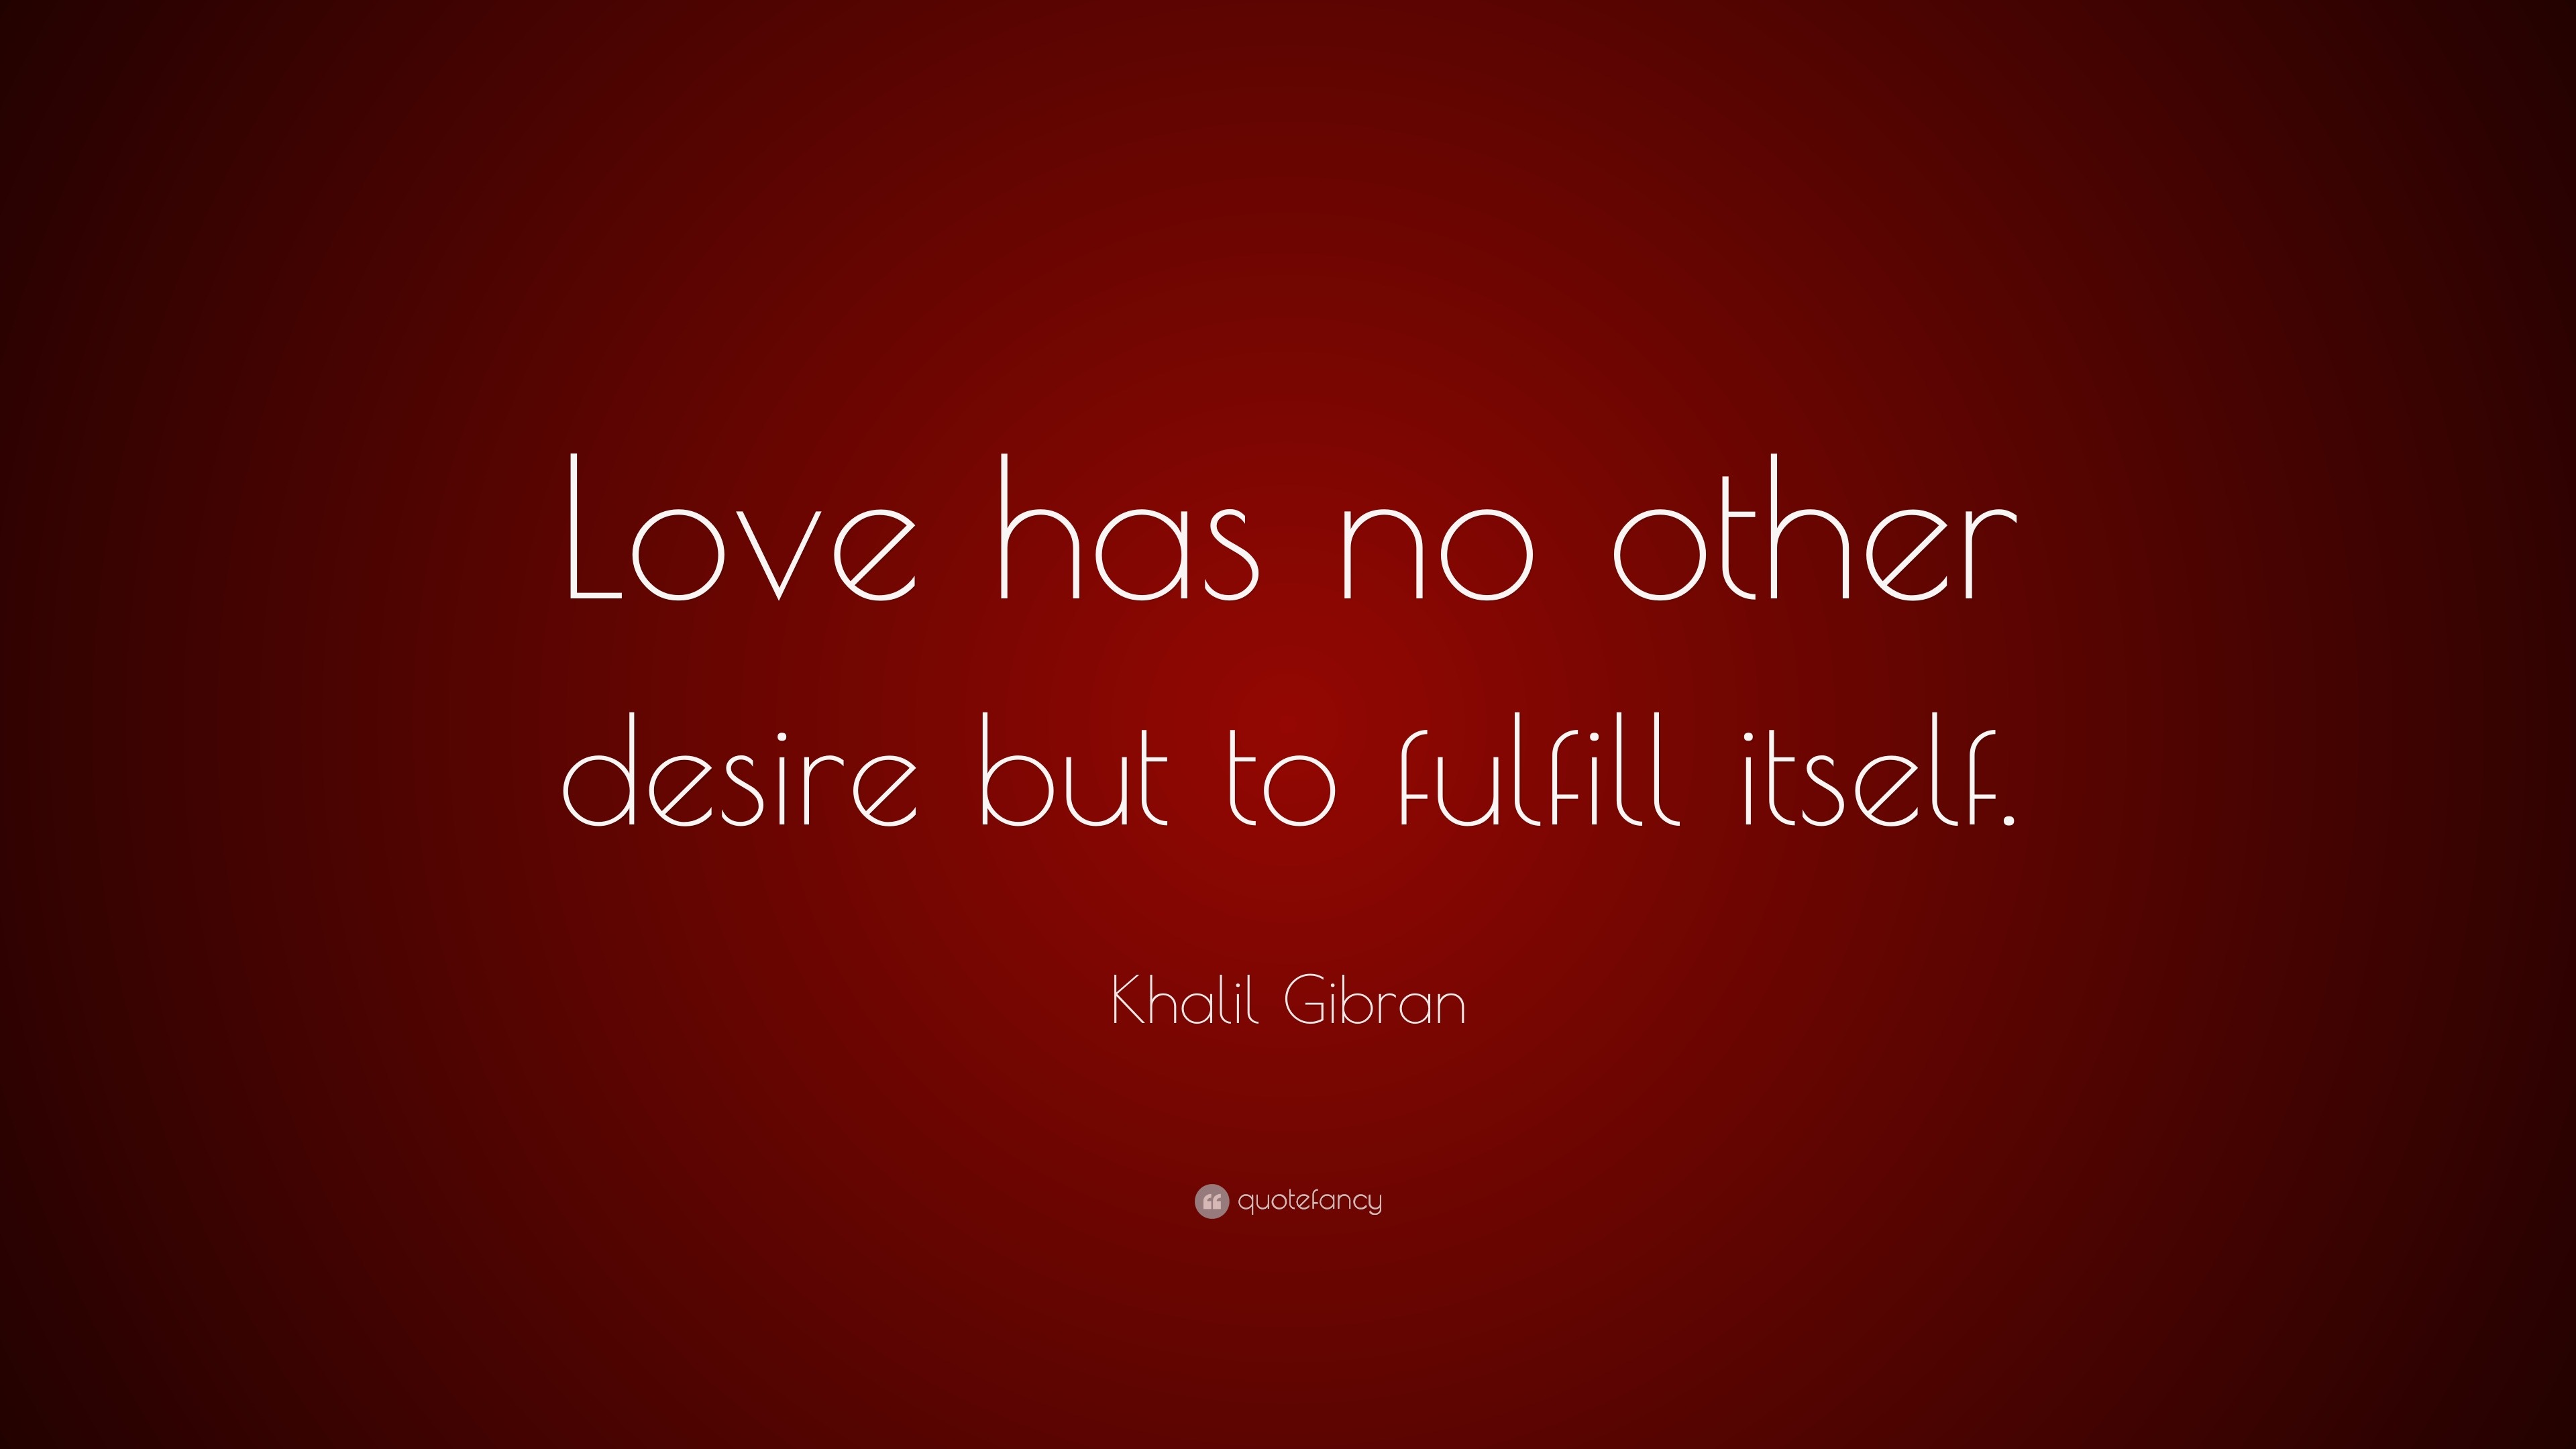 Khalil Gibran Quote Love Has No Other Desire But To Fulfill Itself